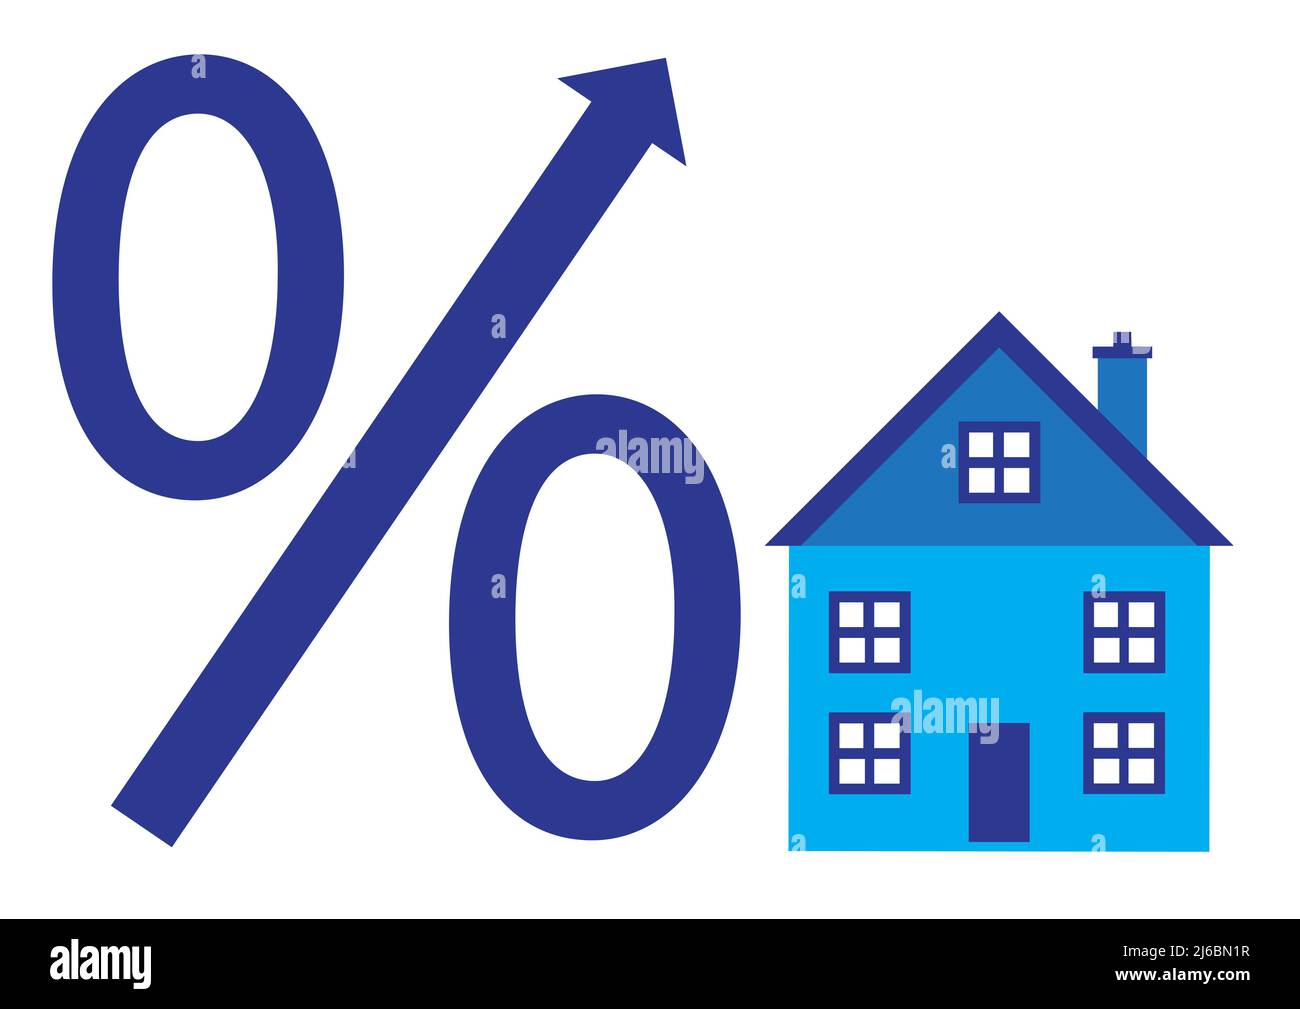 An illustration of increasing interest rates on the property market in terms of cost of finance, mortgage increase and price increase. Stock Photo